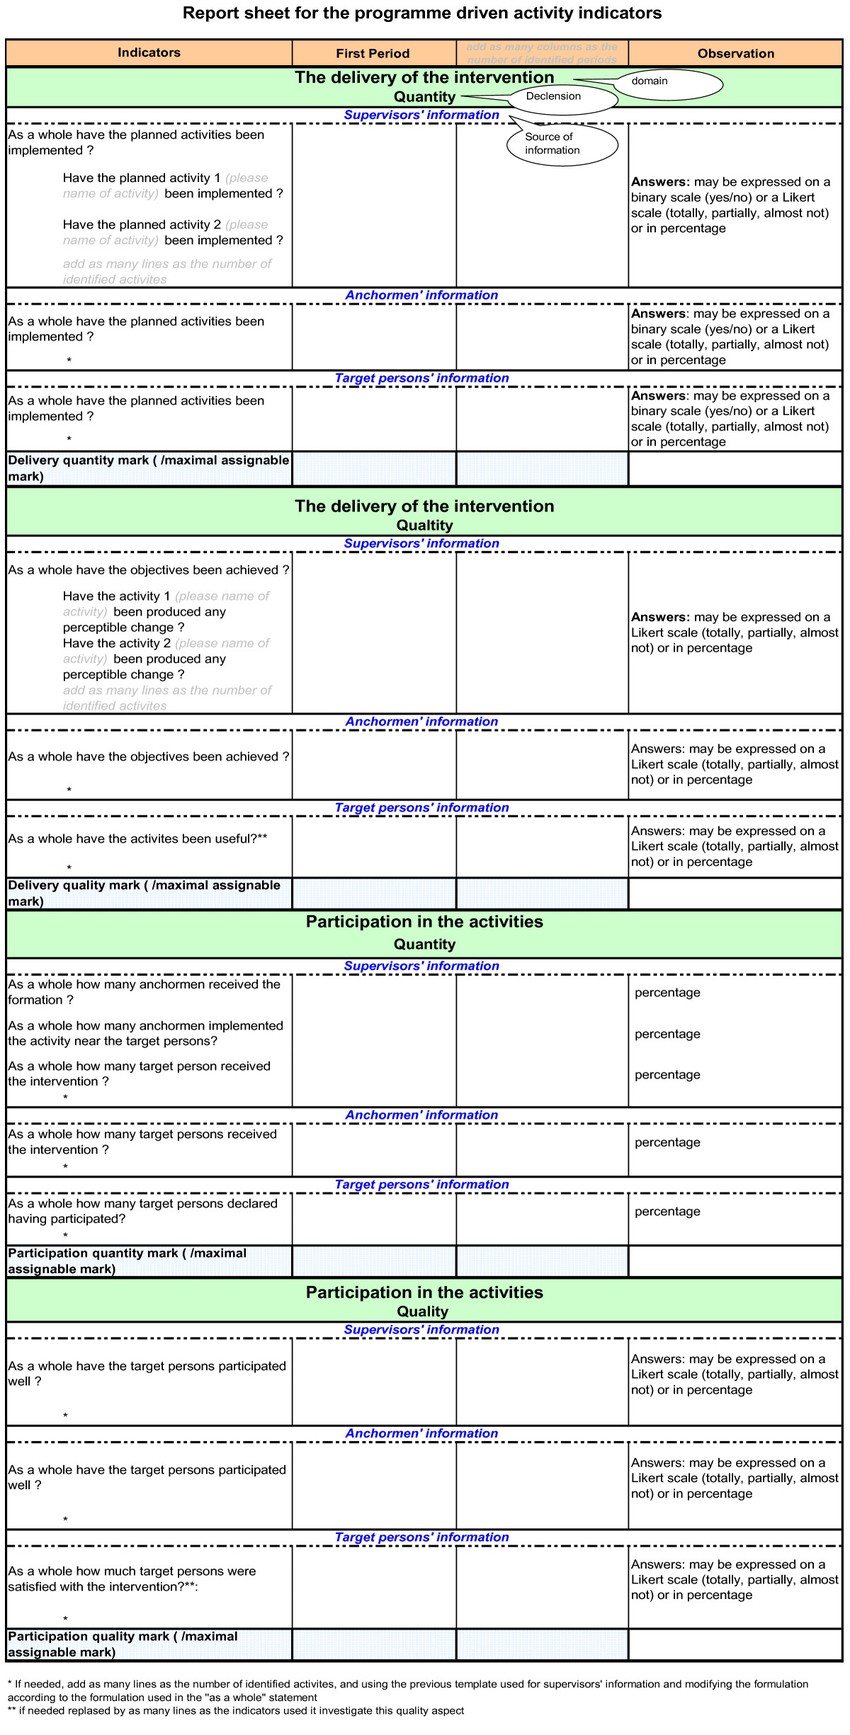 Template Of Indicators Report Sheet. | Download Scientific Within Intervention Report Template